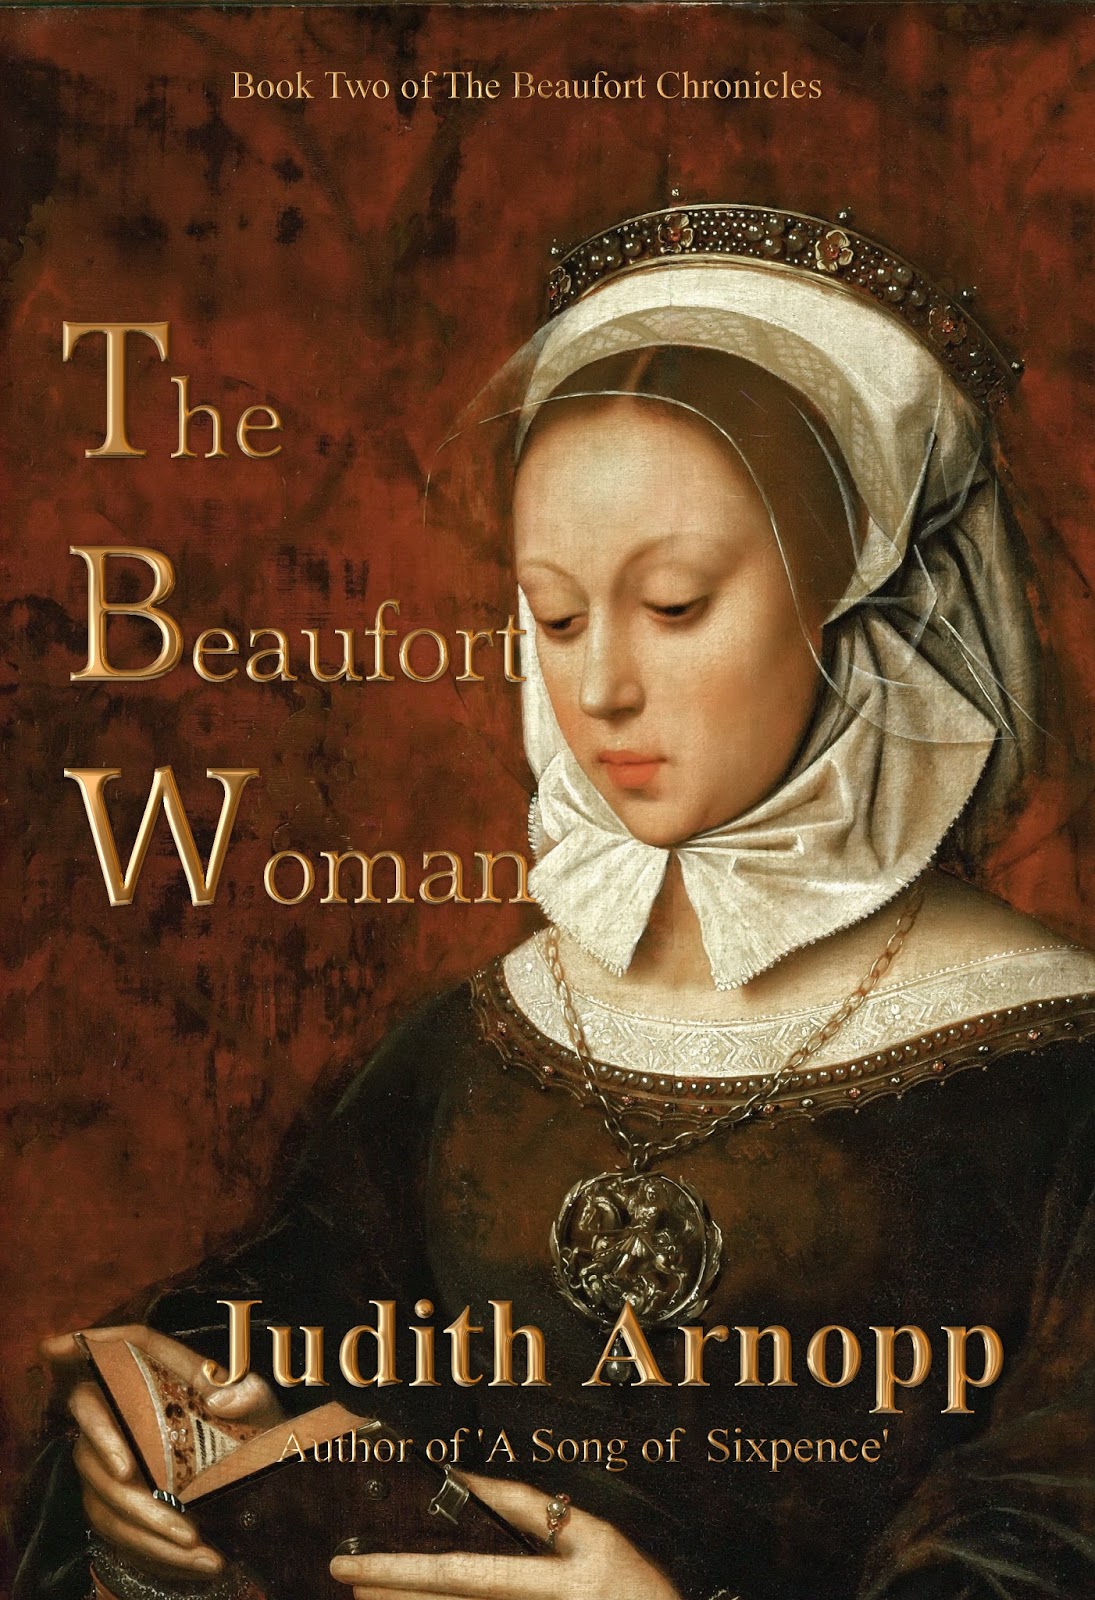 English Historical Fiction Authors: Margaret Beaufort: The King's Mother